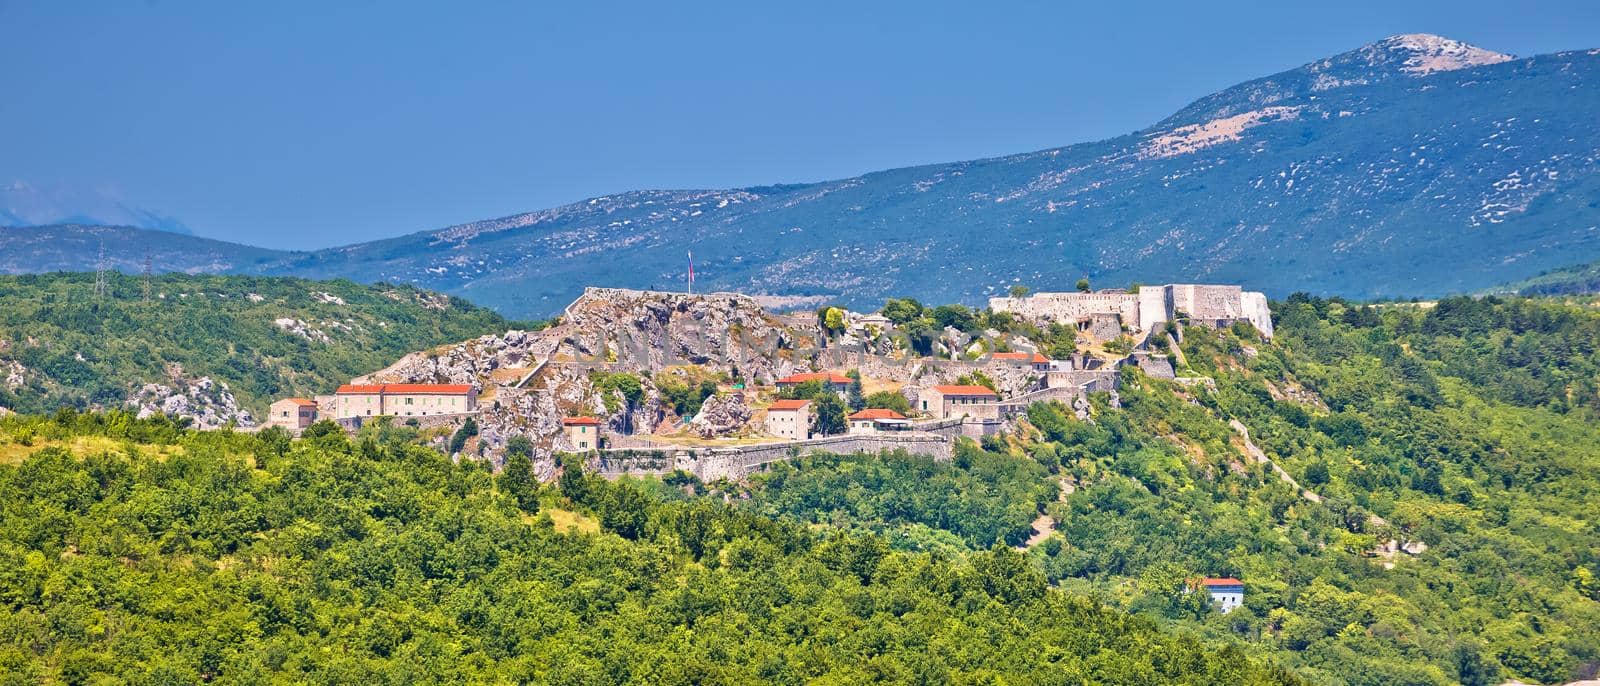 Knin fortress and landscape aerial panoramic view, second largest fortress in Croatia